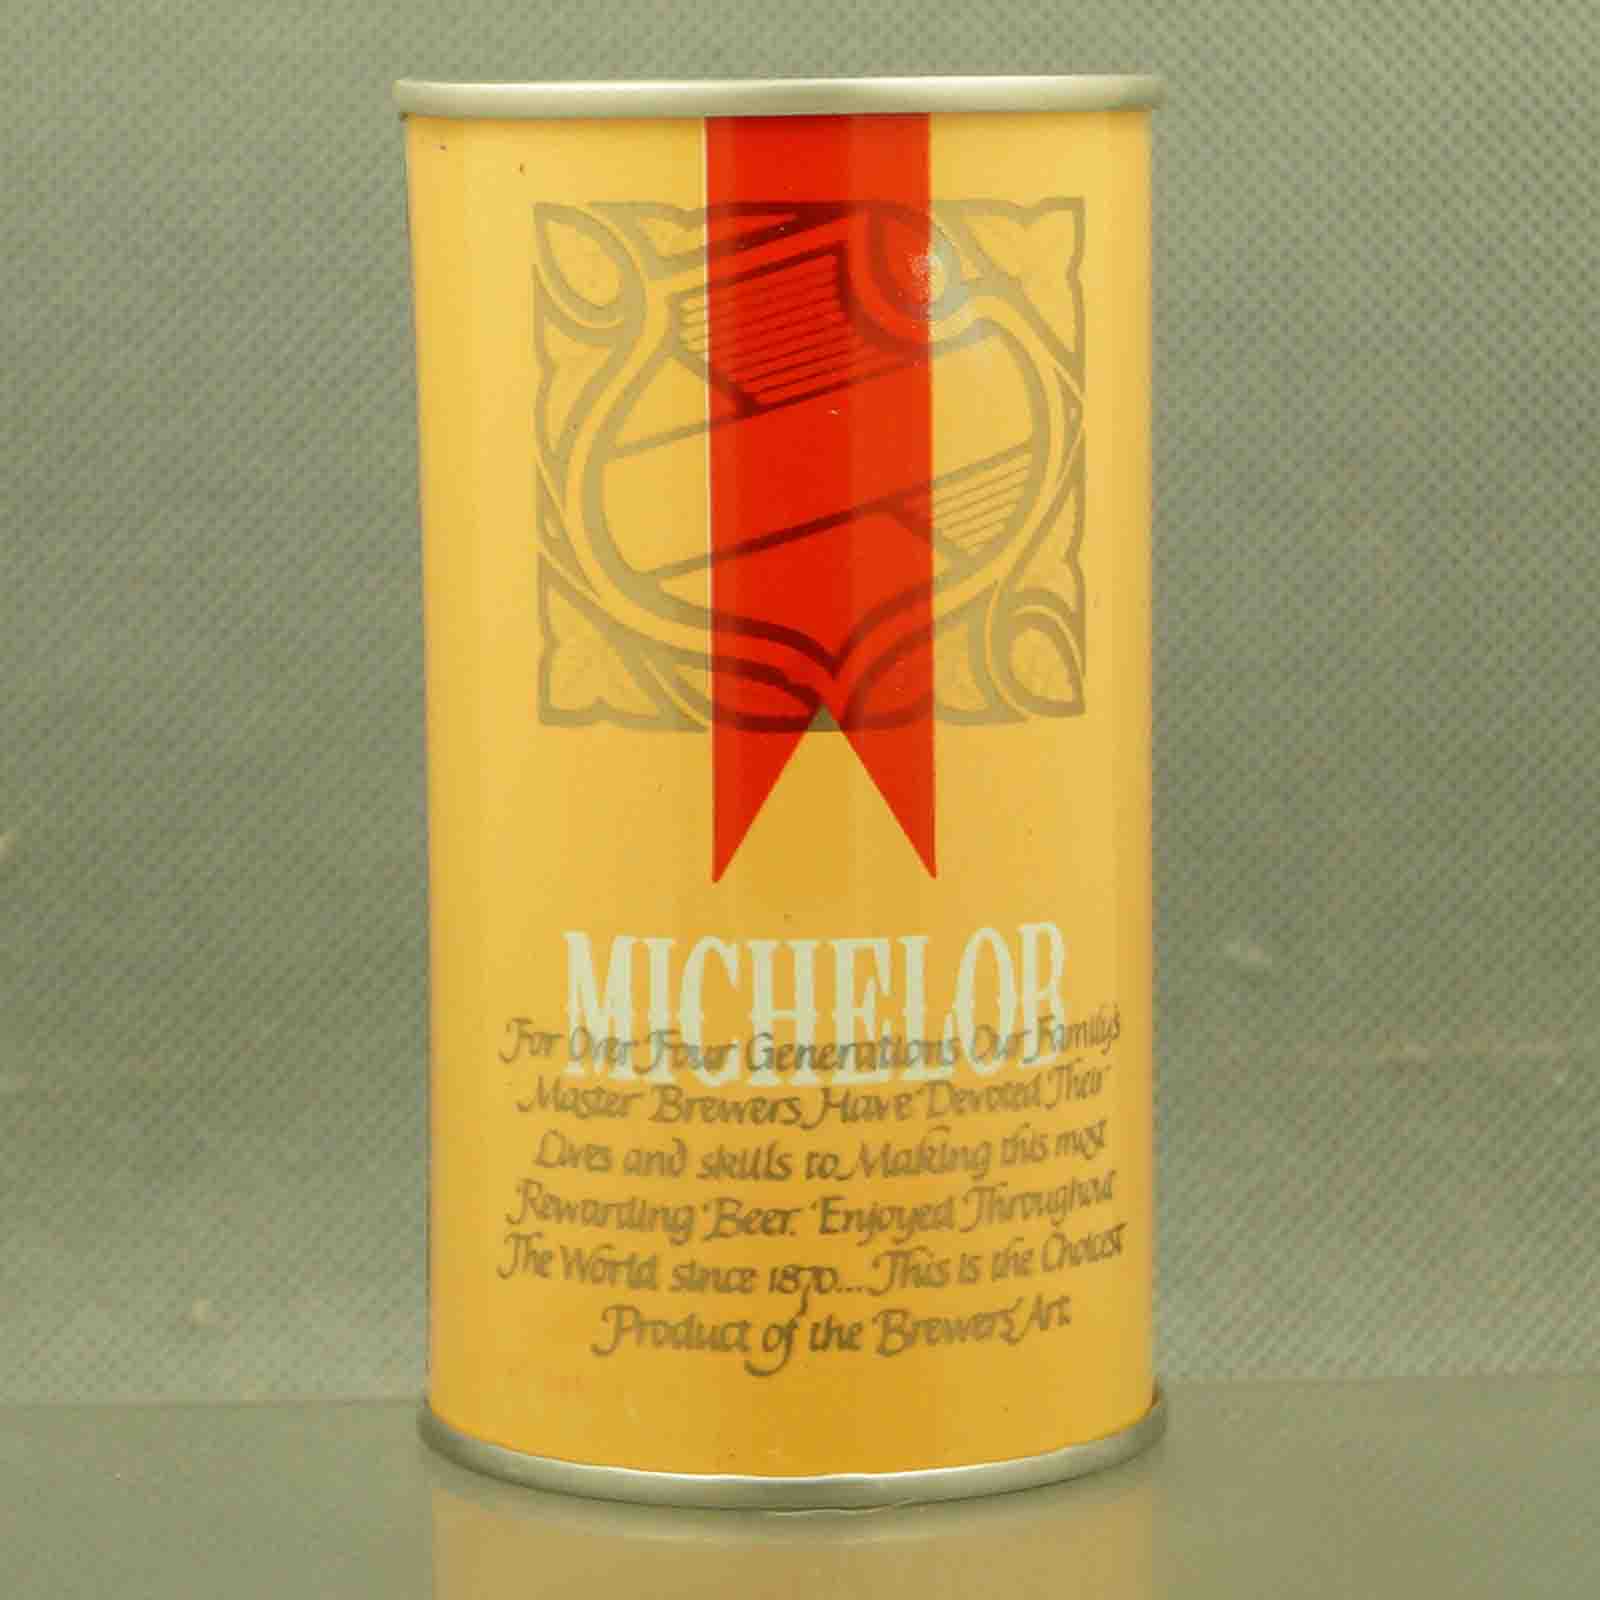 michelob pull tab beer can 1